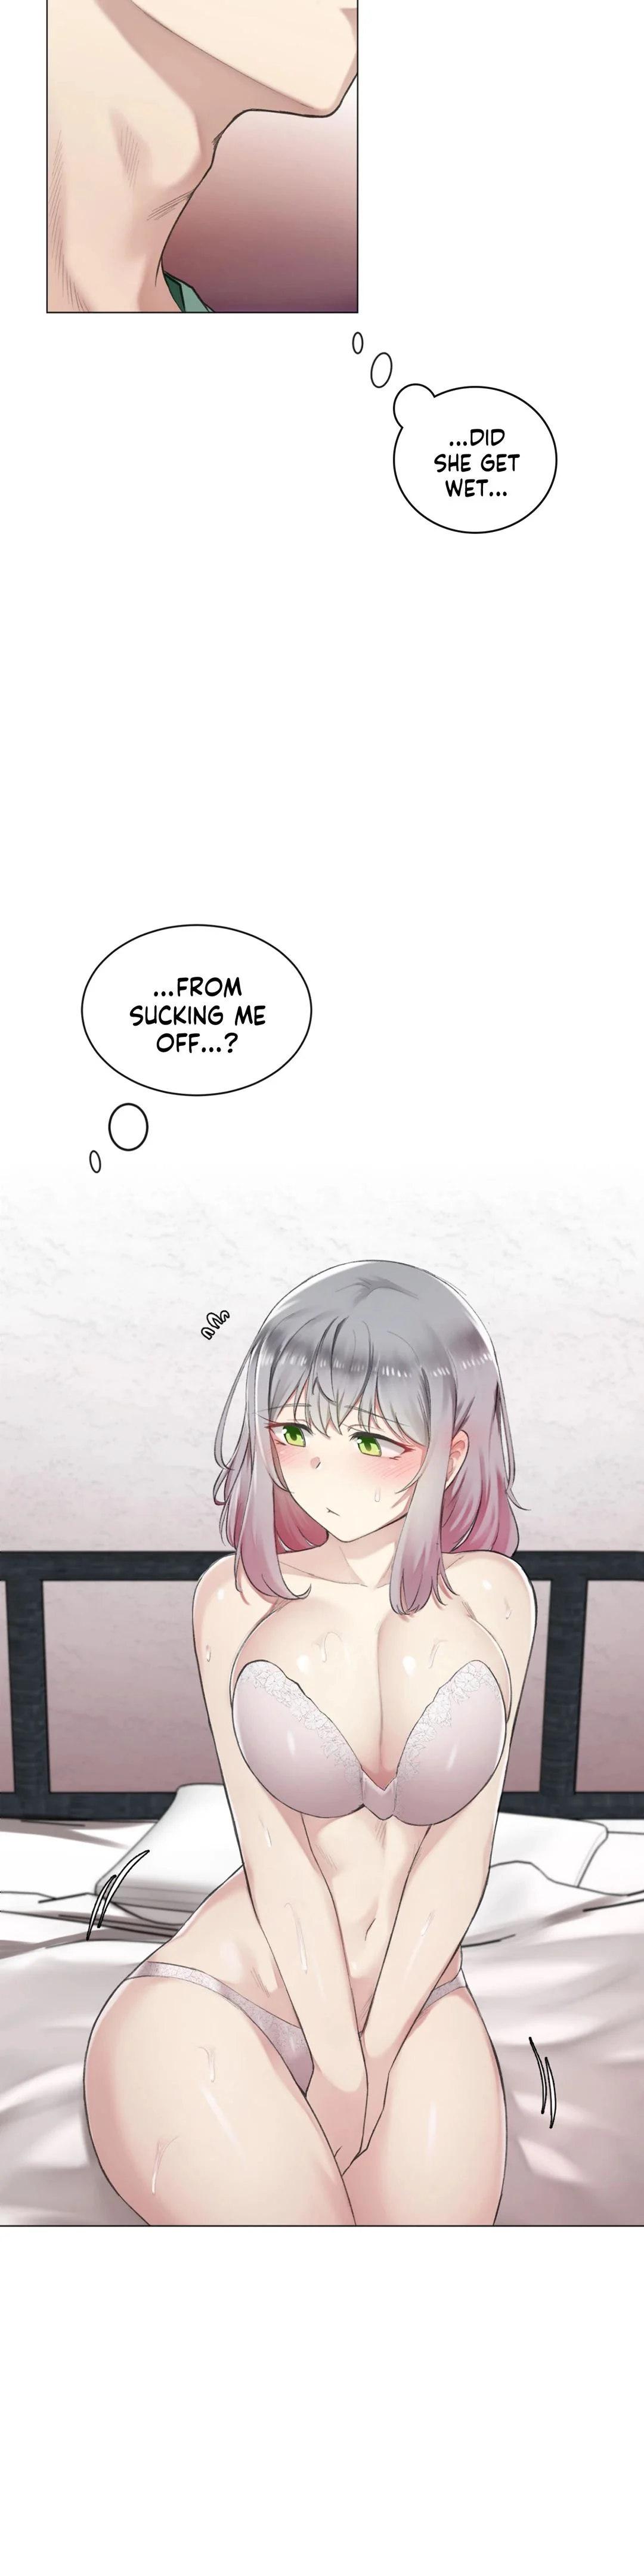 [Dumangoon, KONG_] Sexcape Room: Snap Off Ch.7/7 [English] [Manhwa PDF] Completed 76